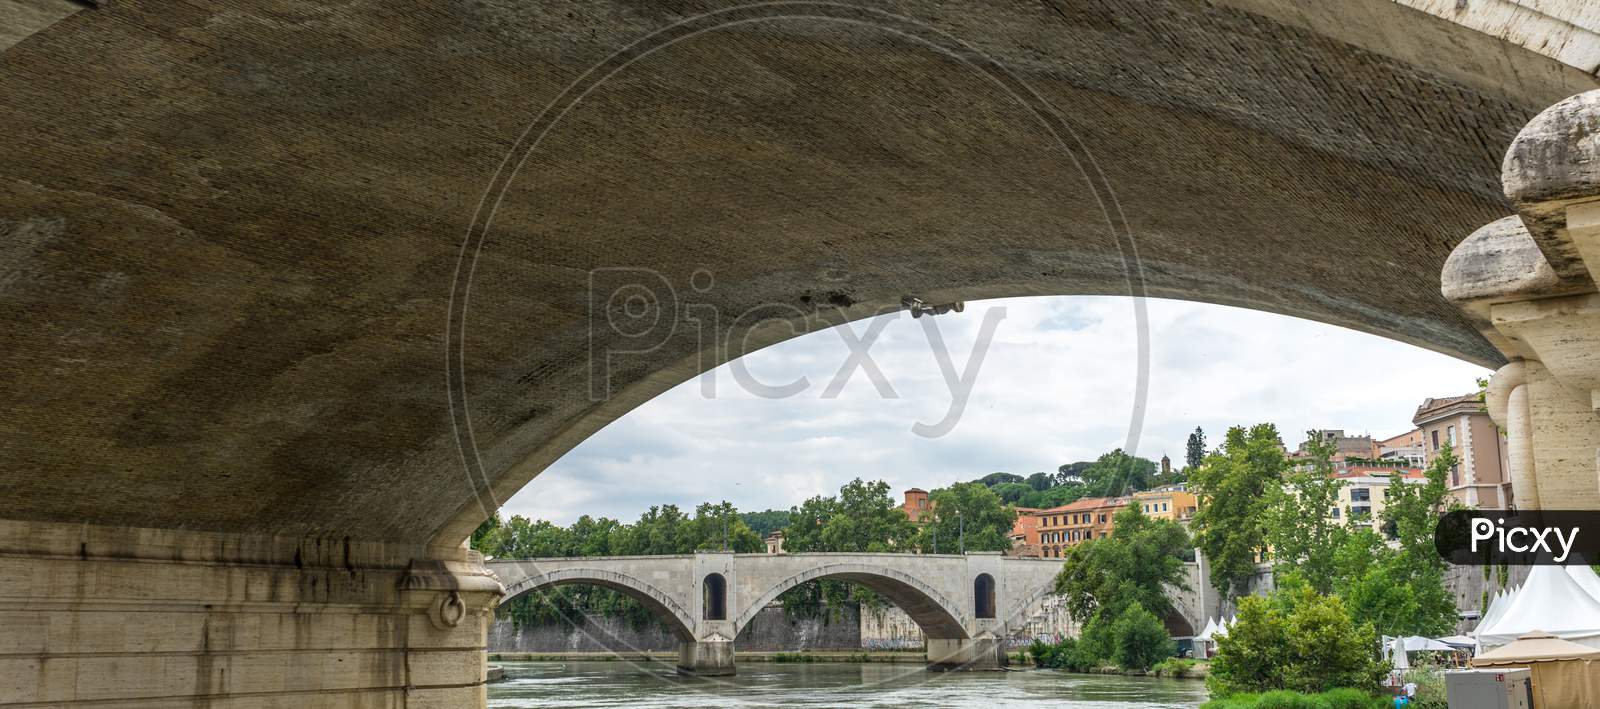 Italy, Rome, A Bridge On The Tiber River Viewed Below Arch Of Another Bridge